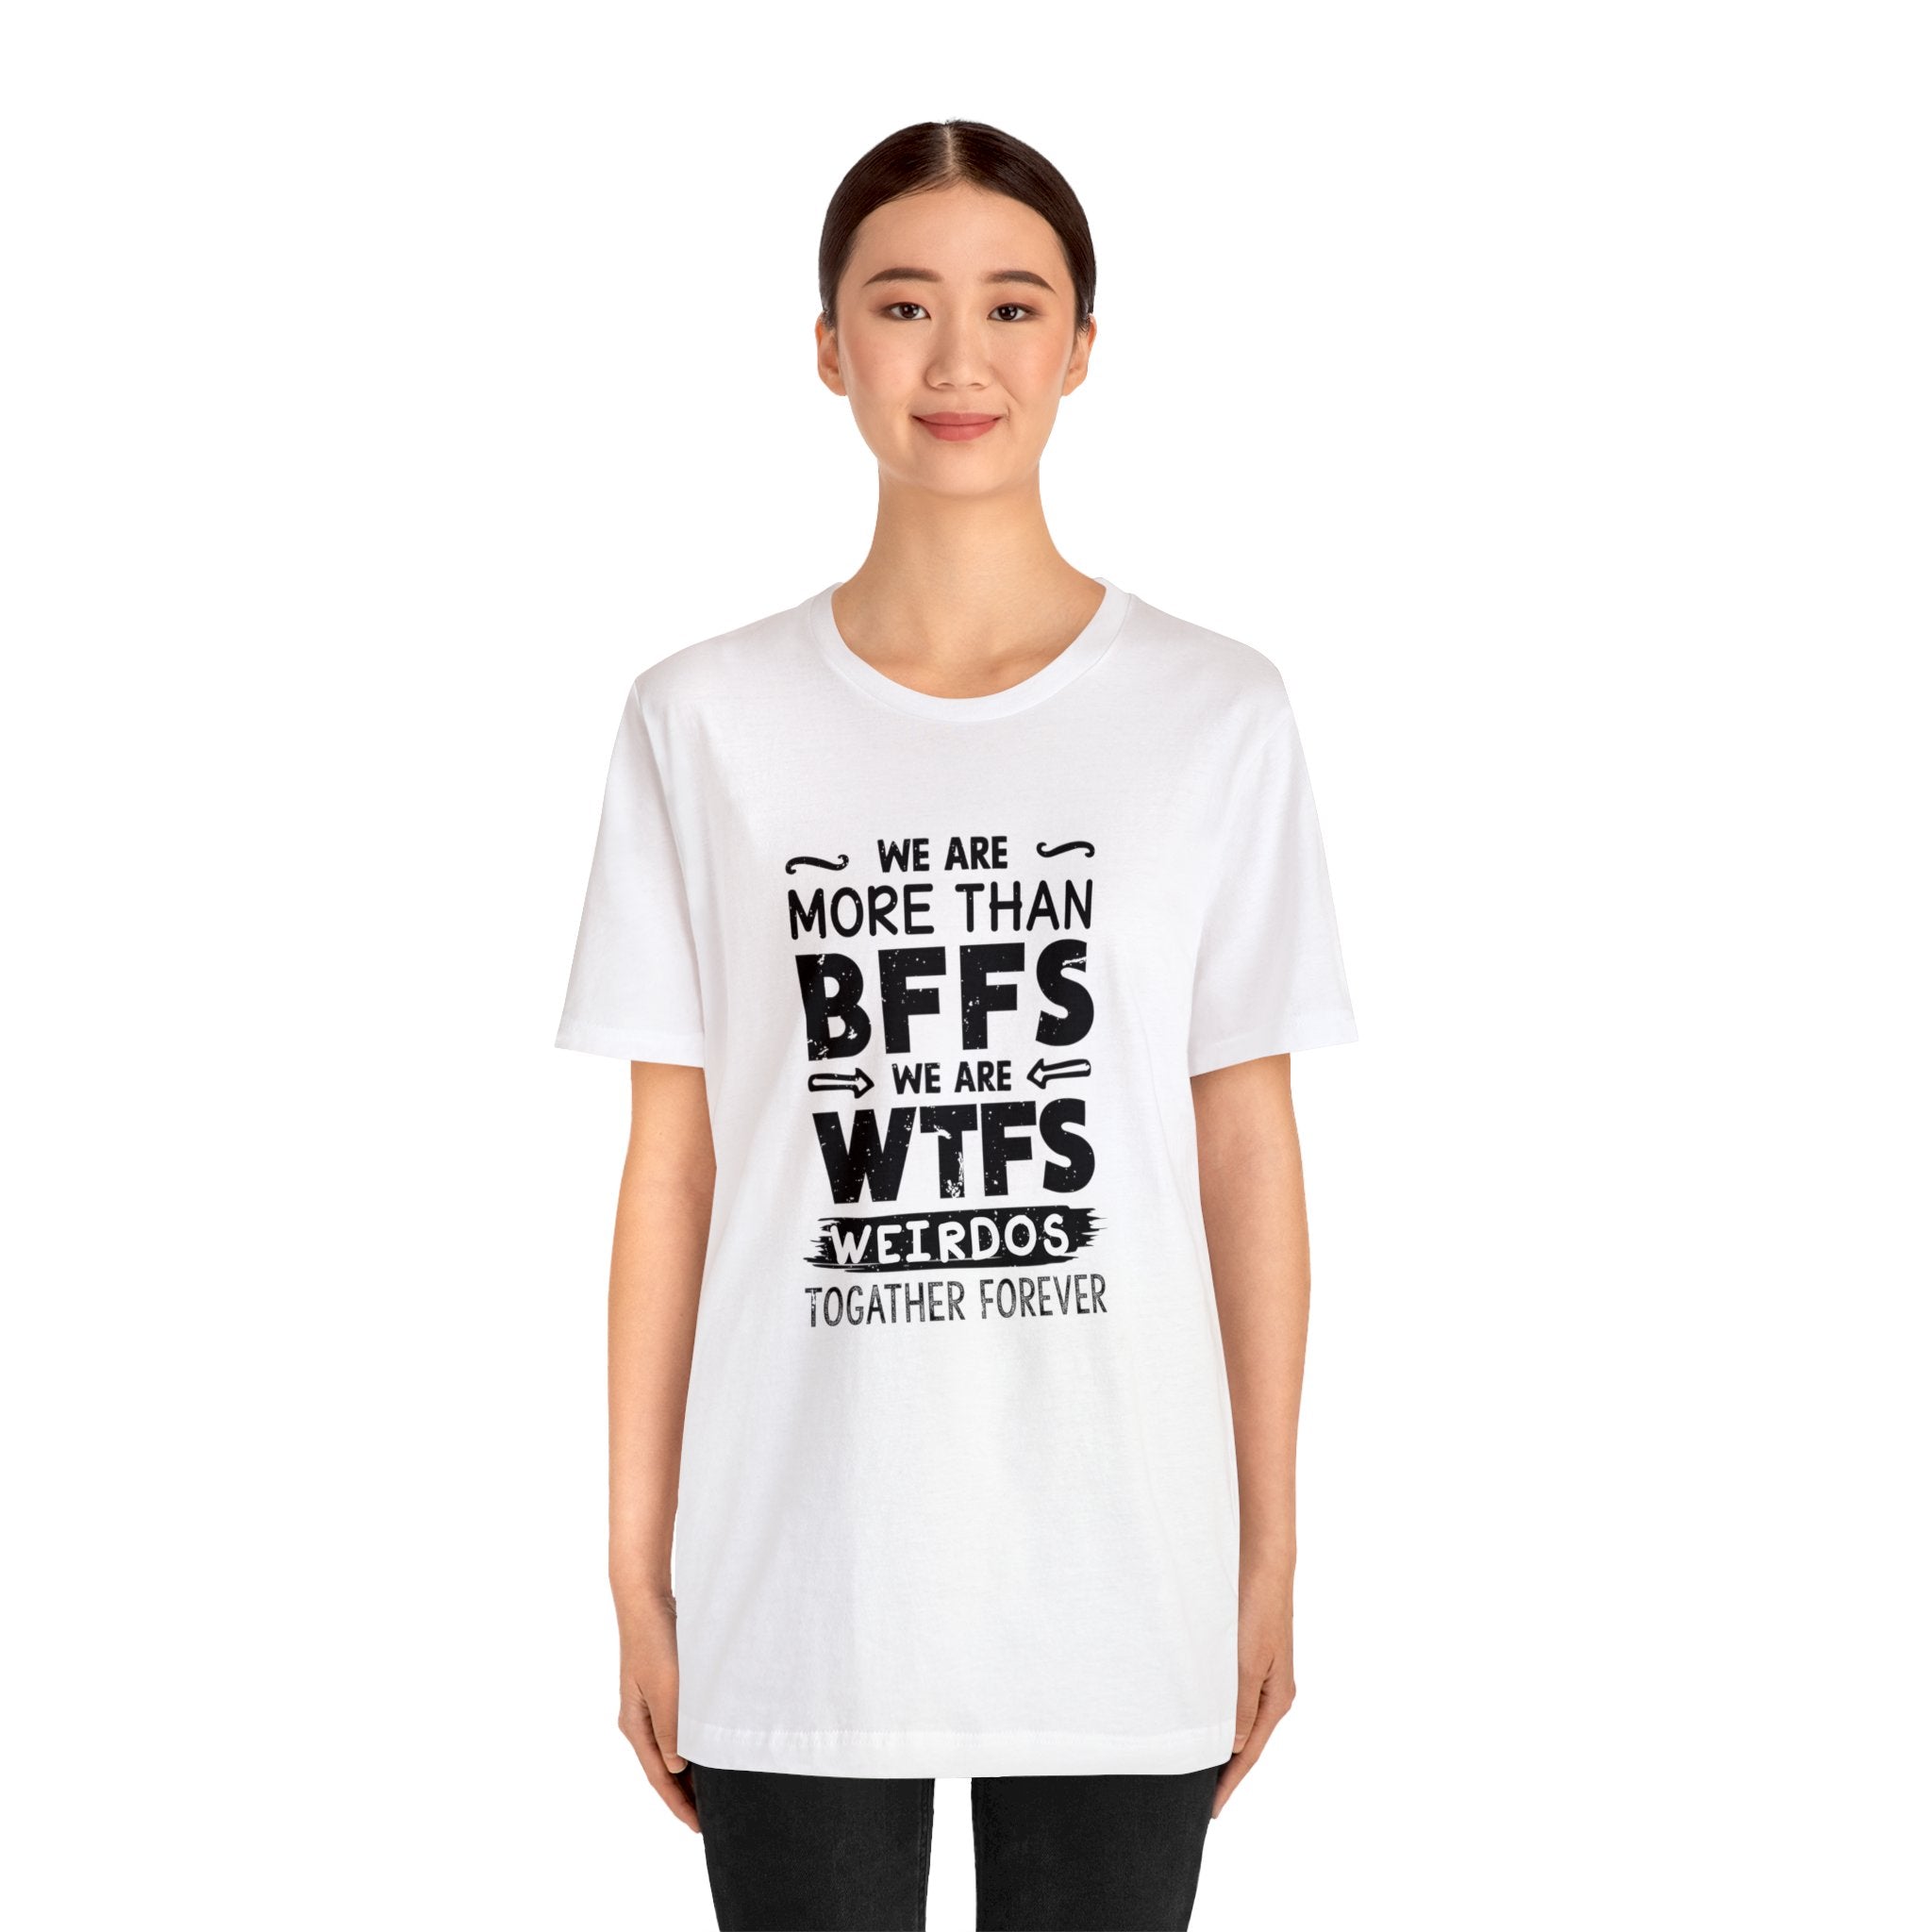 A woman wearing a We Are More T-Shirt with the message "I'm more than BFFs" can be ordered today.